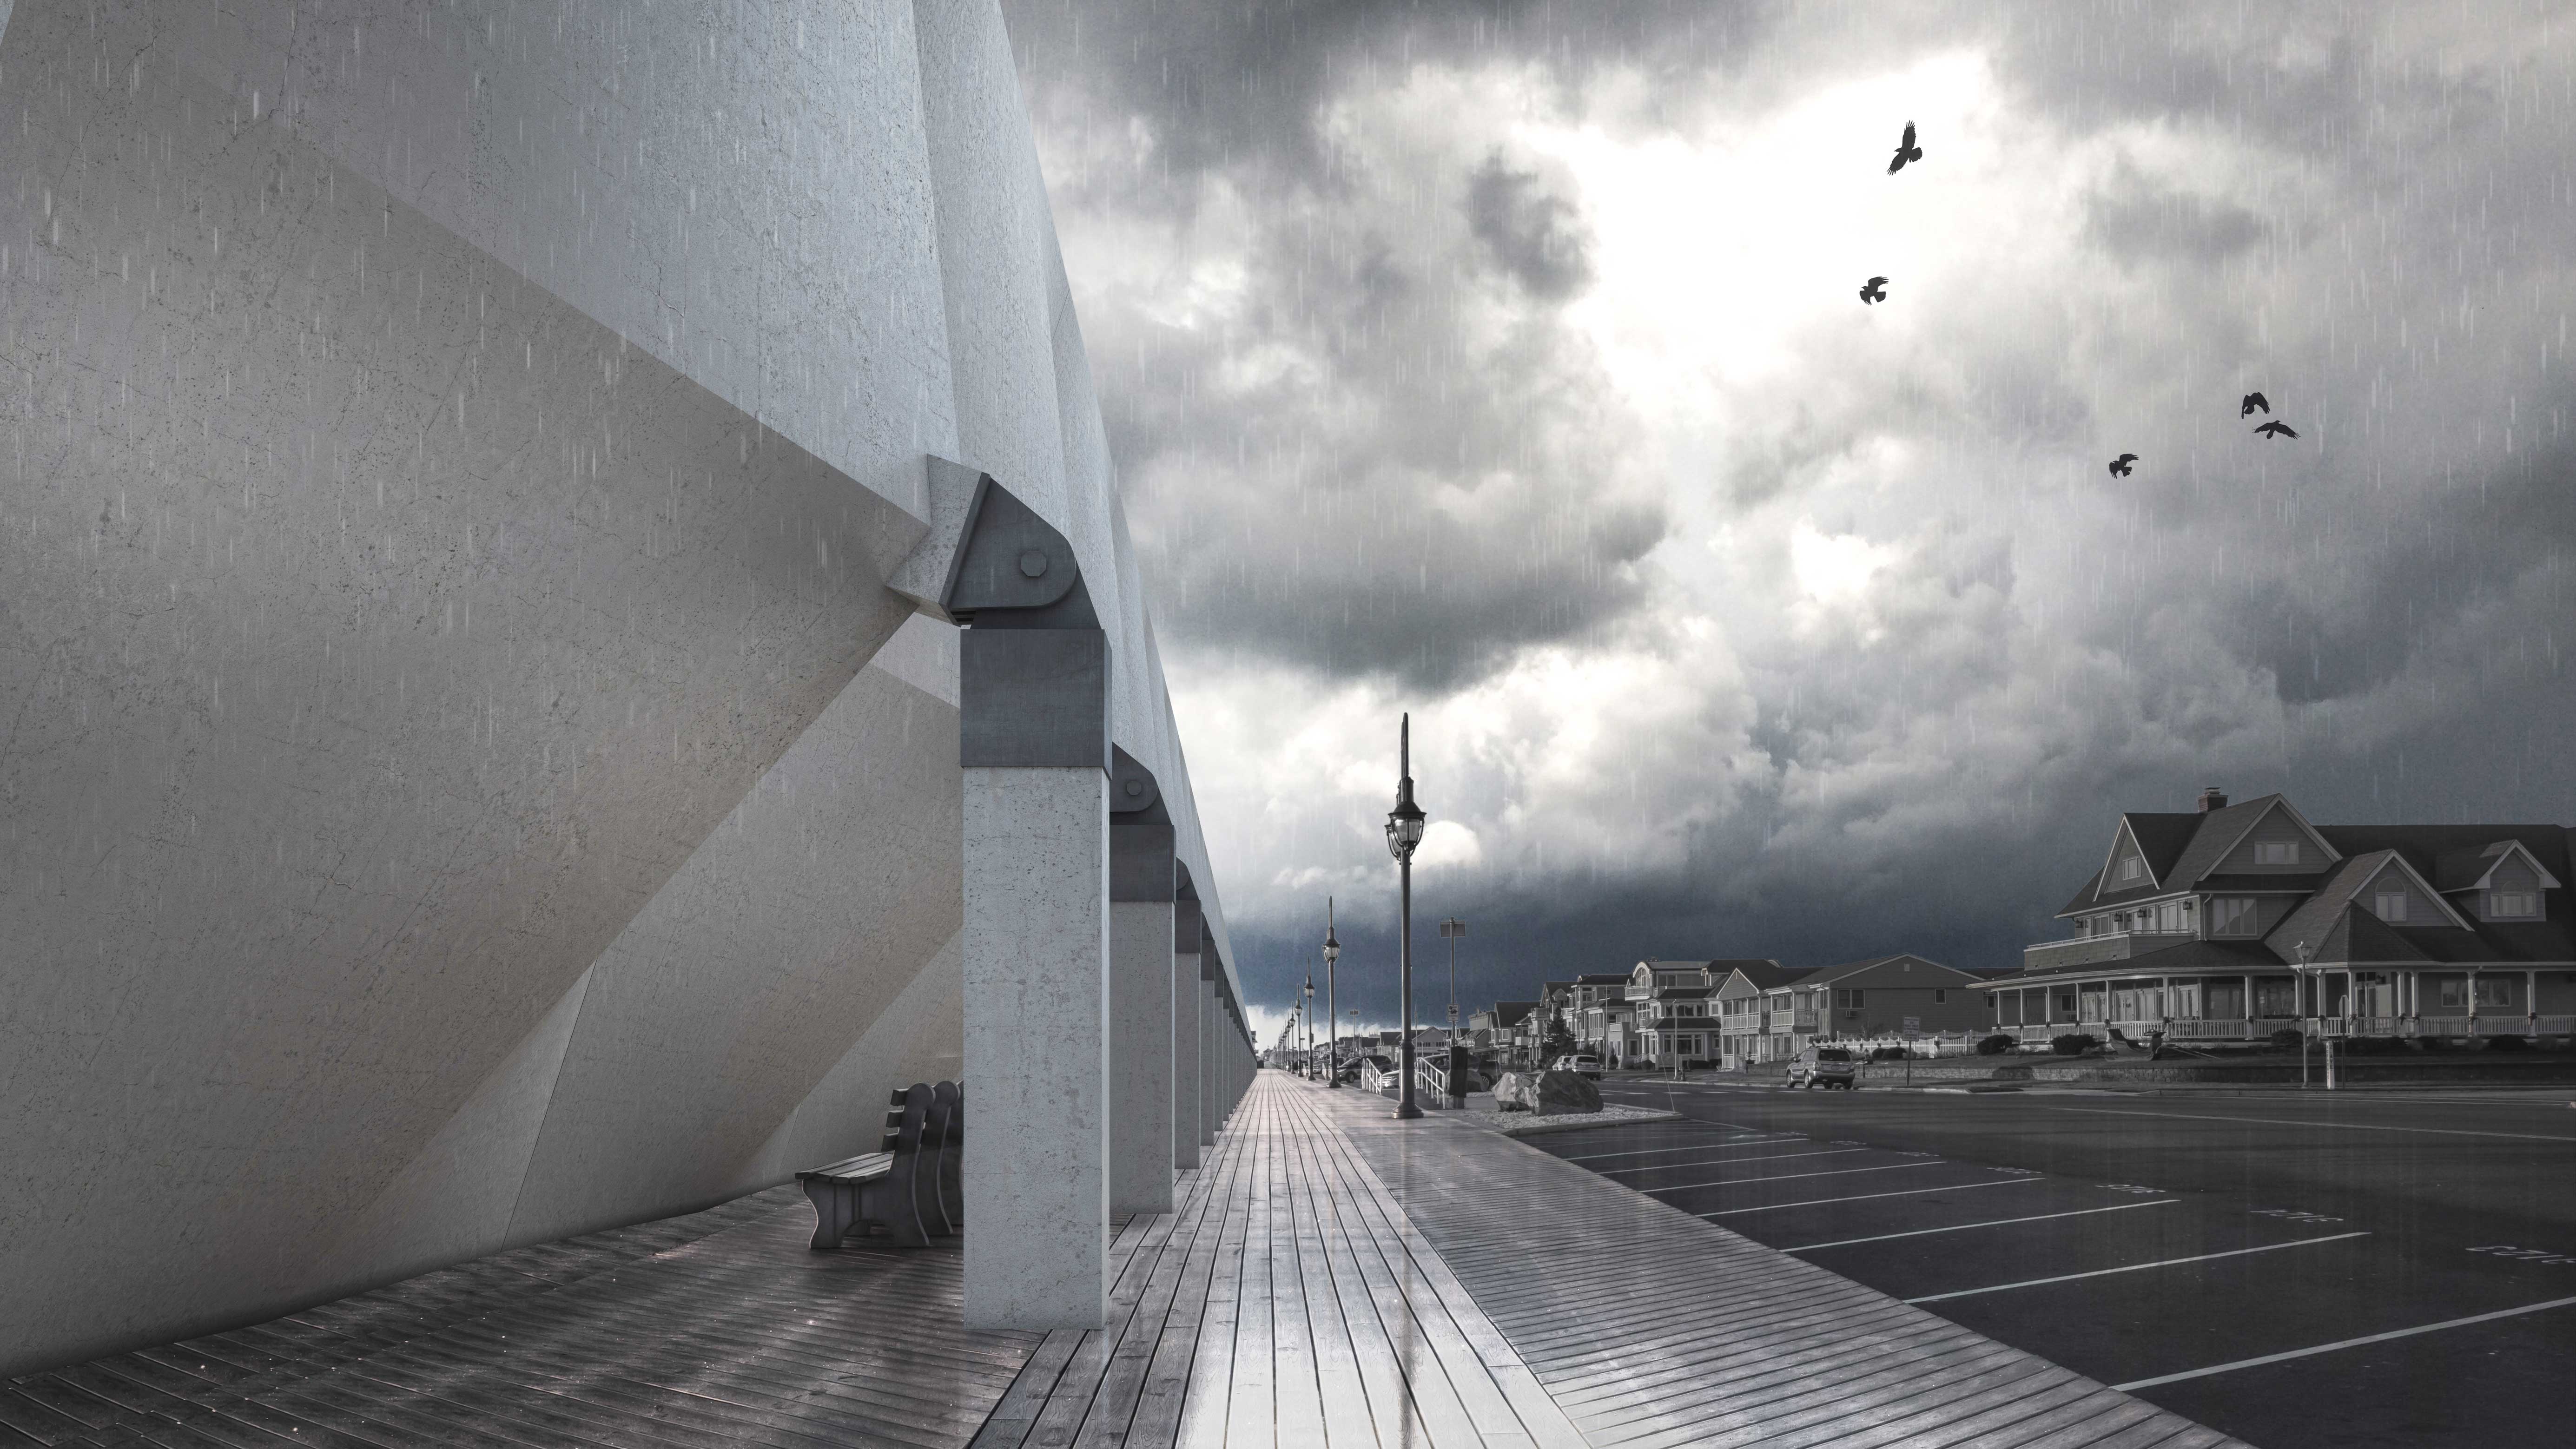 Concrete umbrellas tilted down to protect coastal structures during a storm